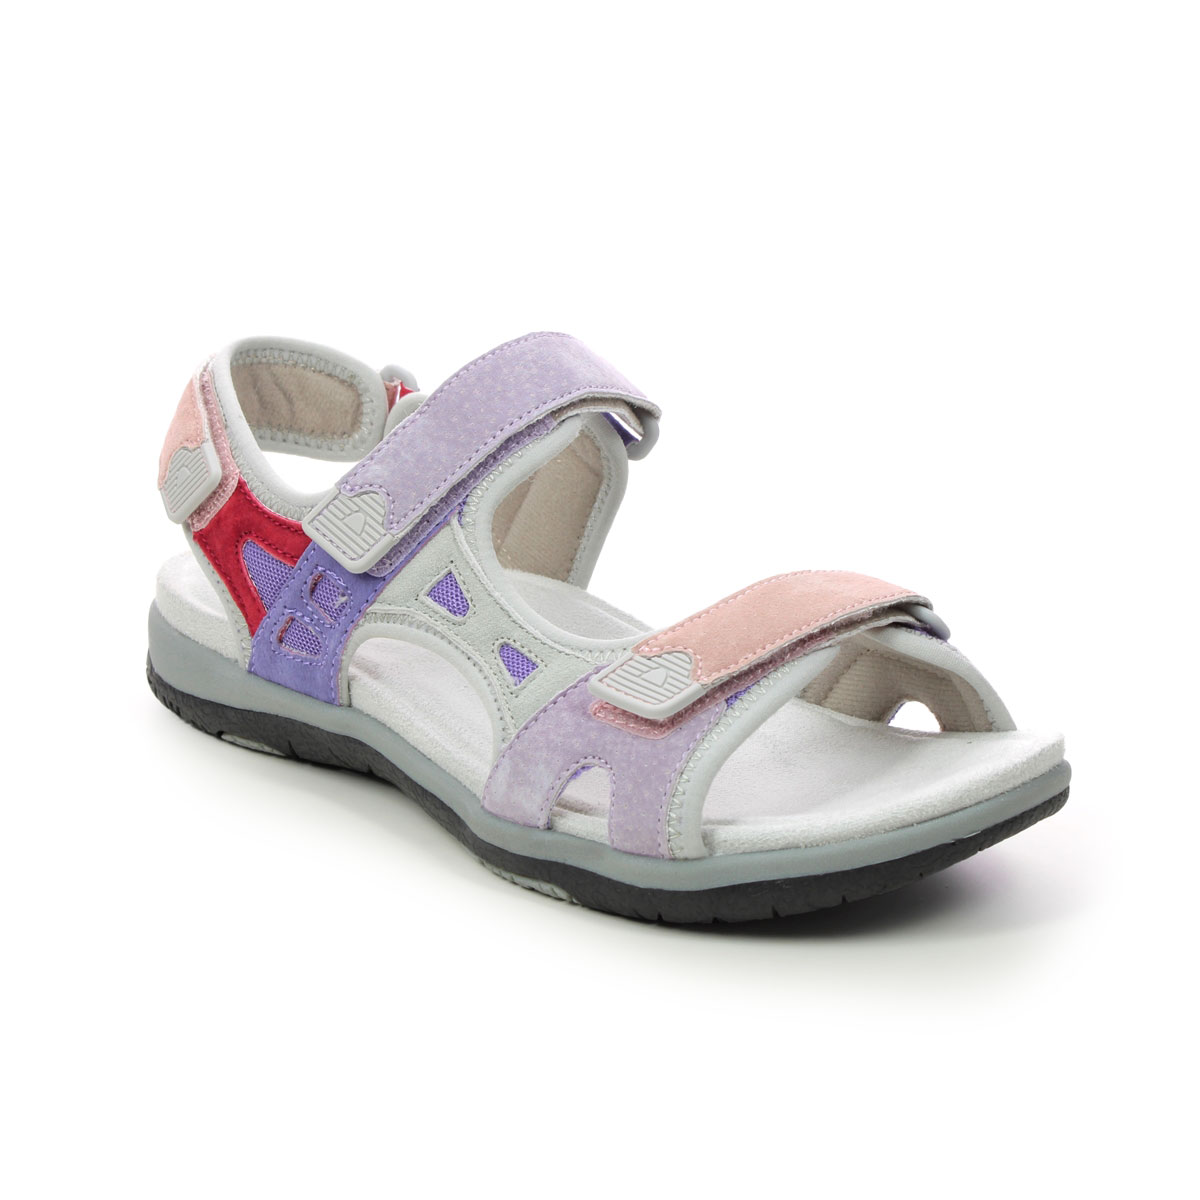 Earth Spirit Zeal Purple multi Womens Walking Sandals 40741- in a Plain Leather and Textile in Size 5